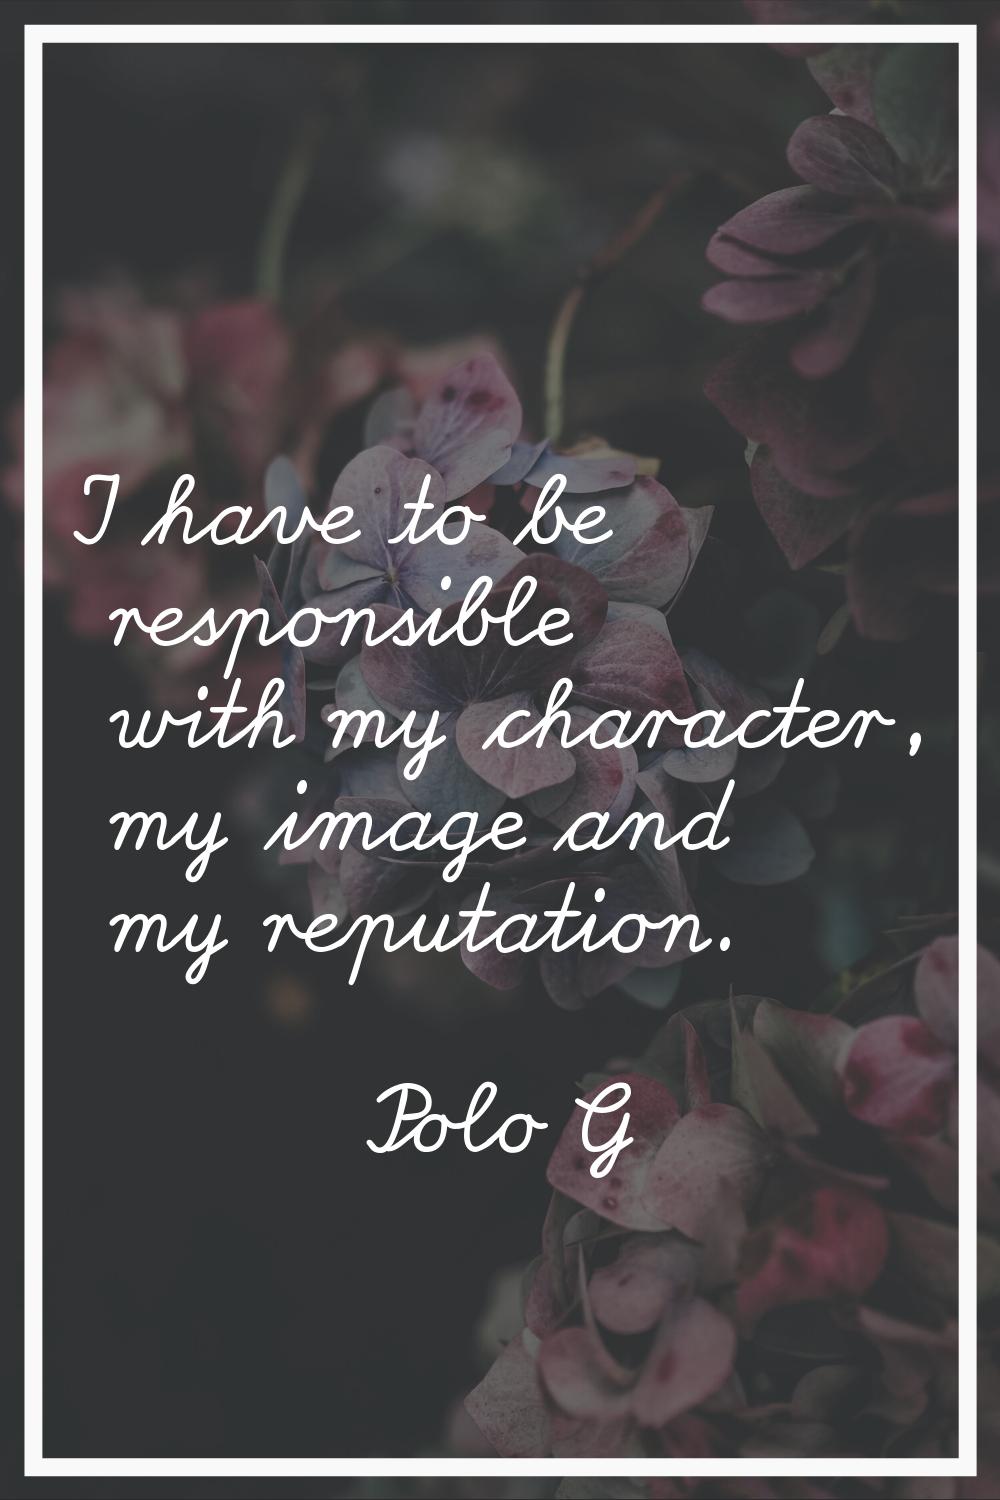 I have to be responsible with my character, my image and my reputation.